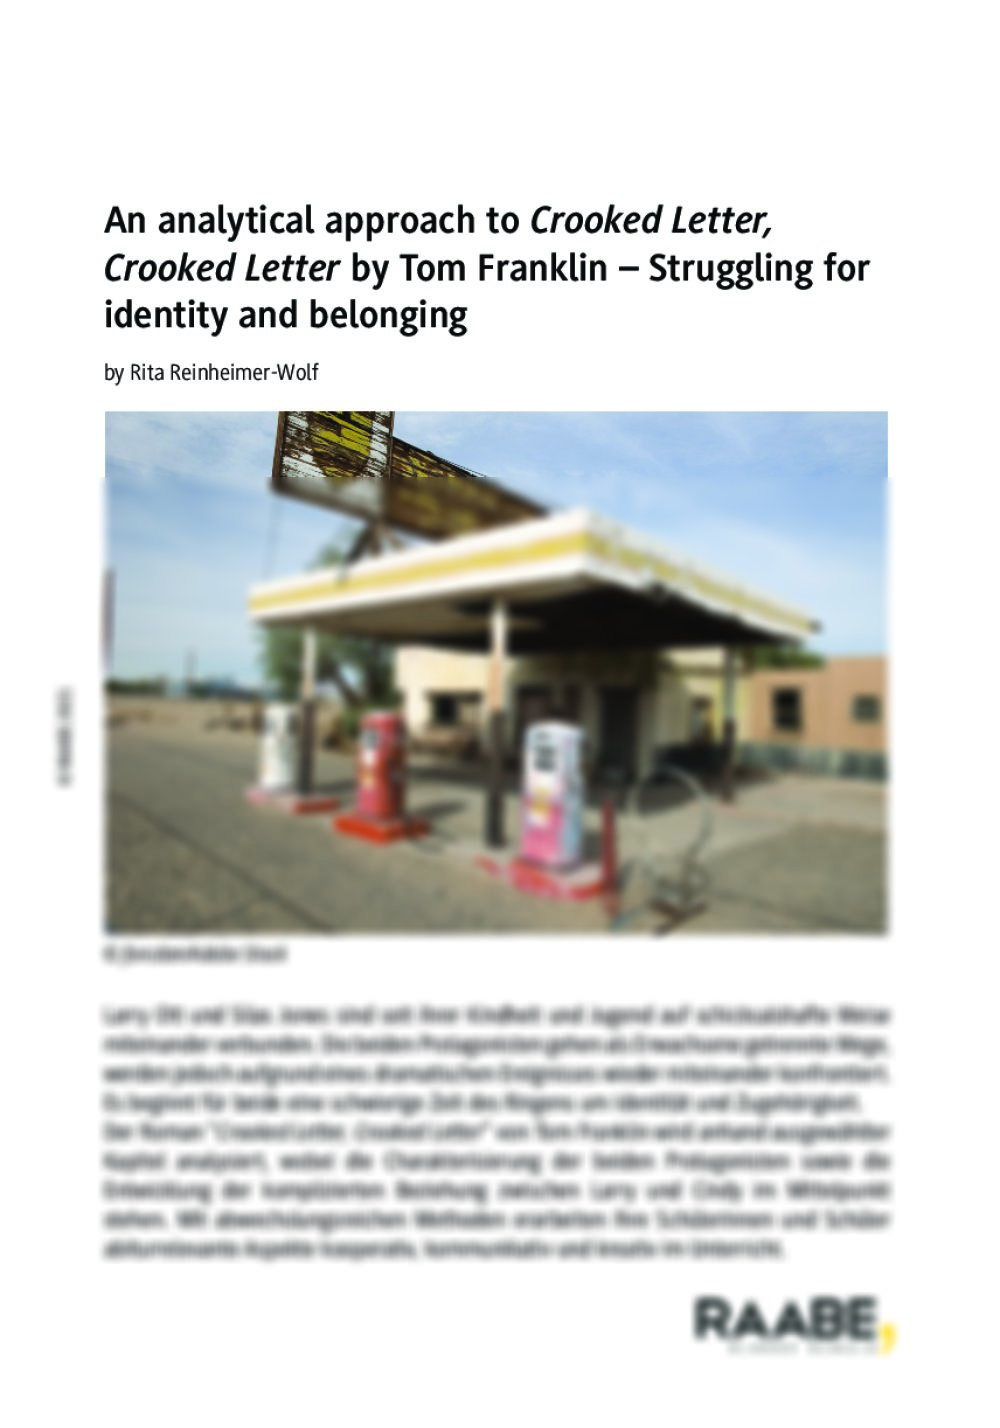 An analytical approach to "Crooked Letter, Crooked Letter" by Tom Franklin - Seite 1